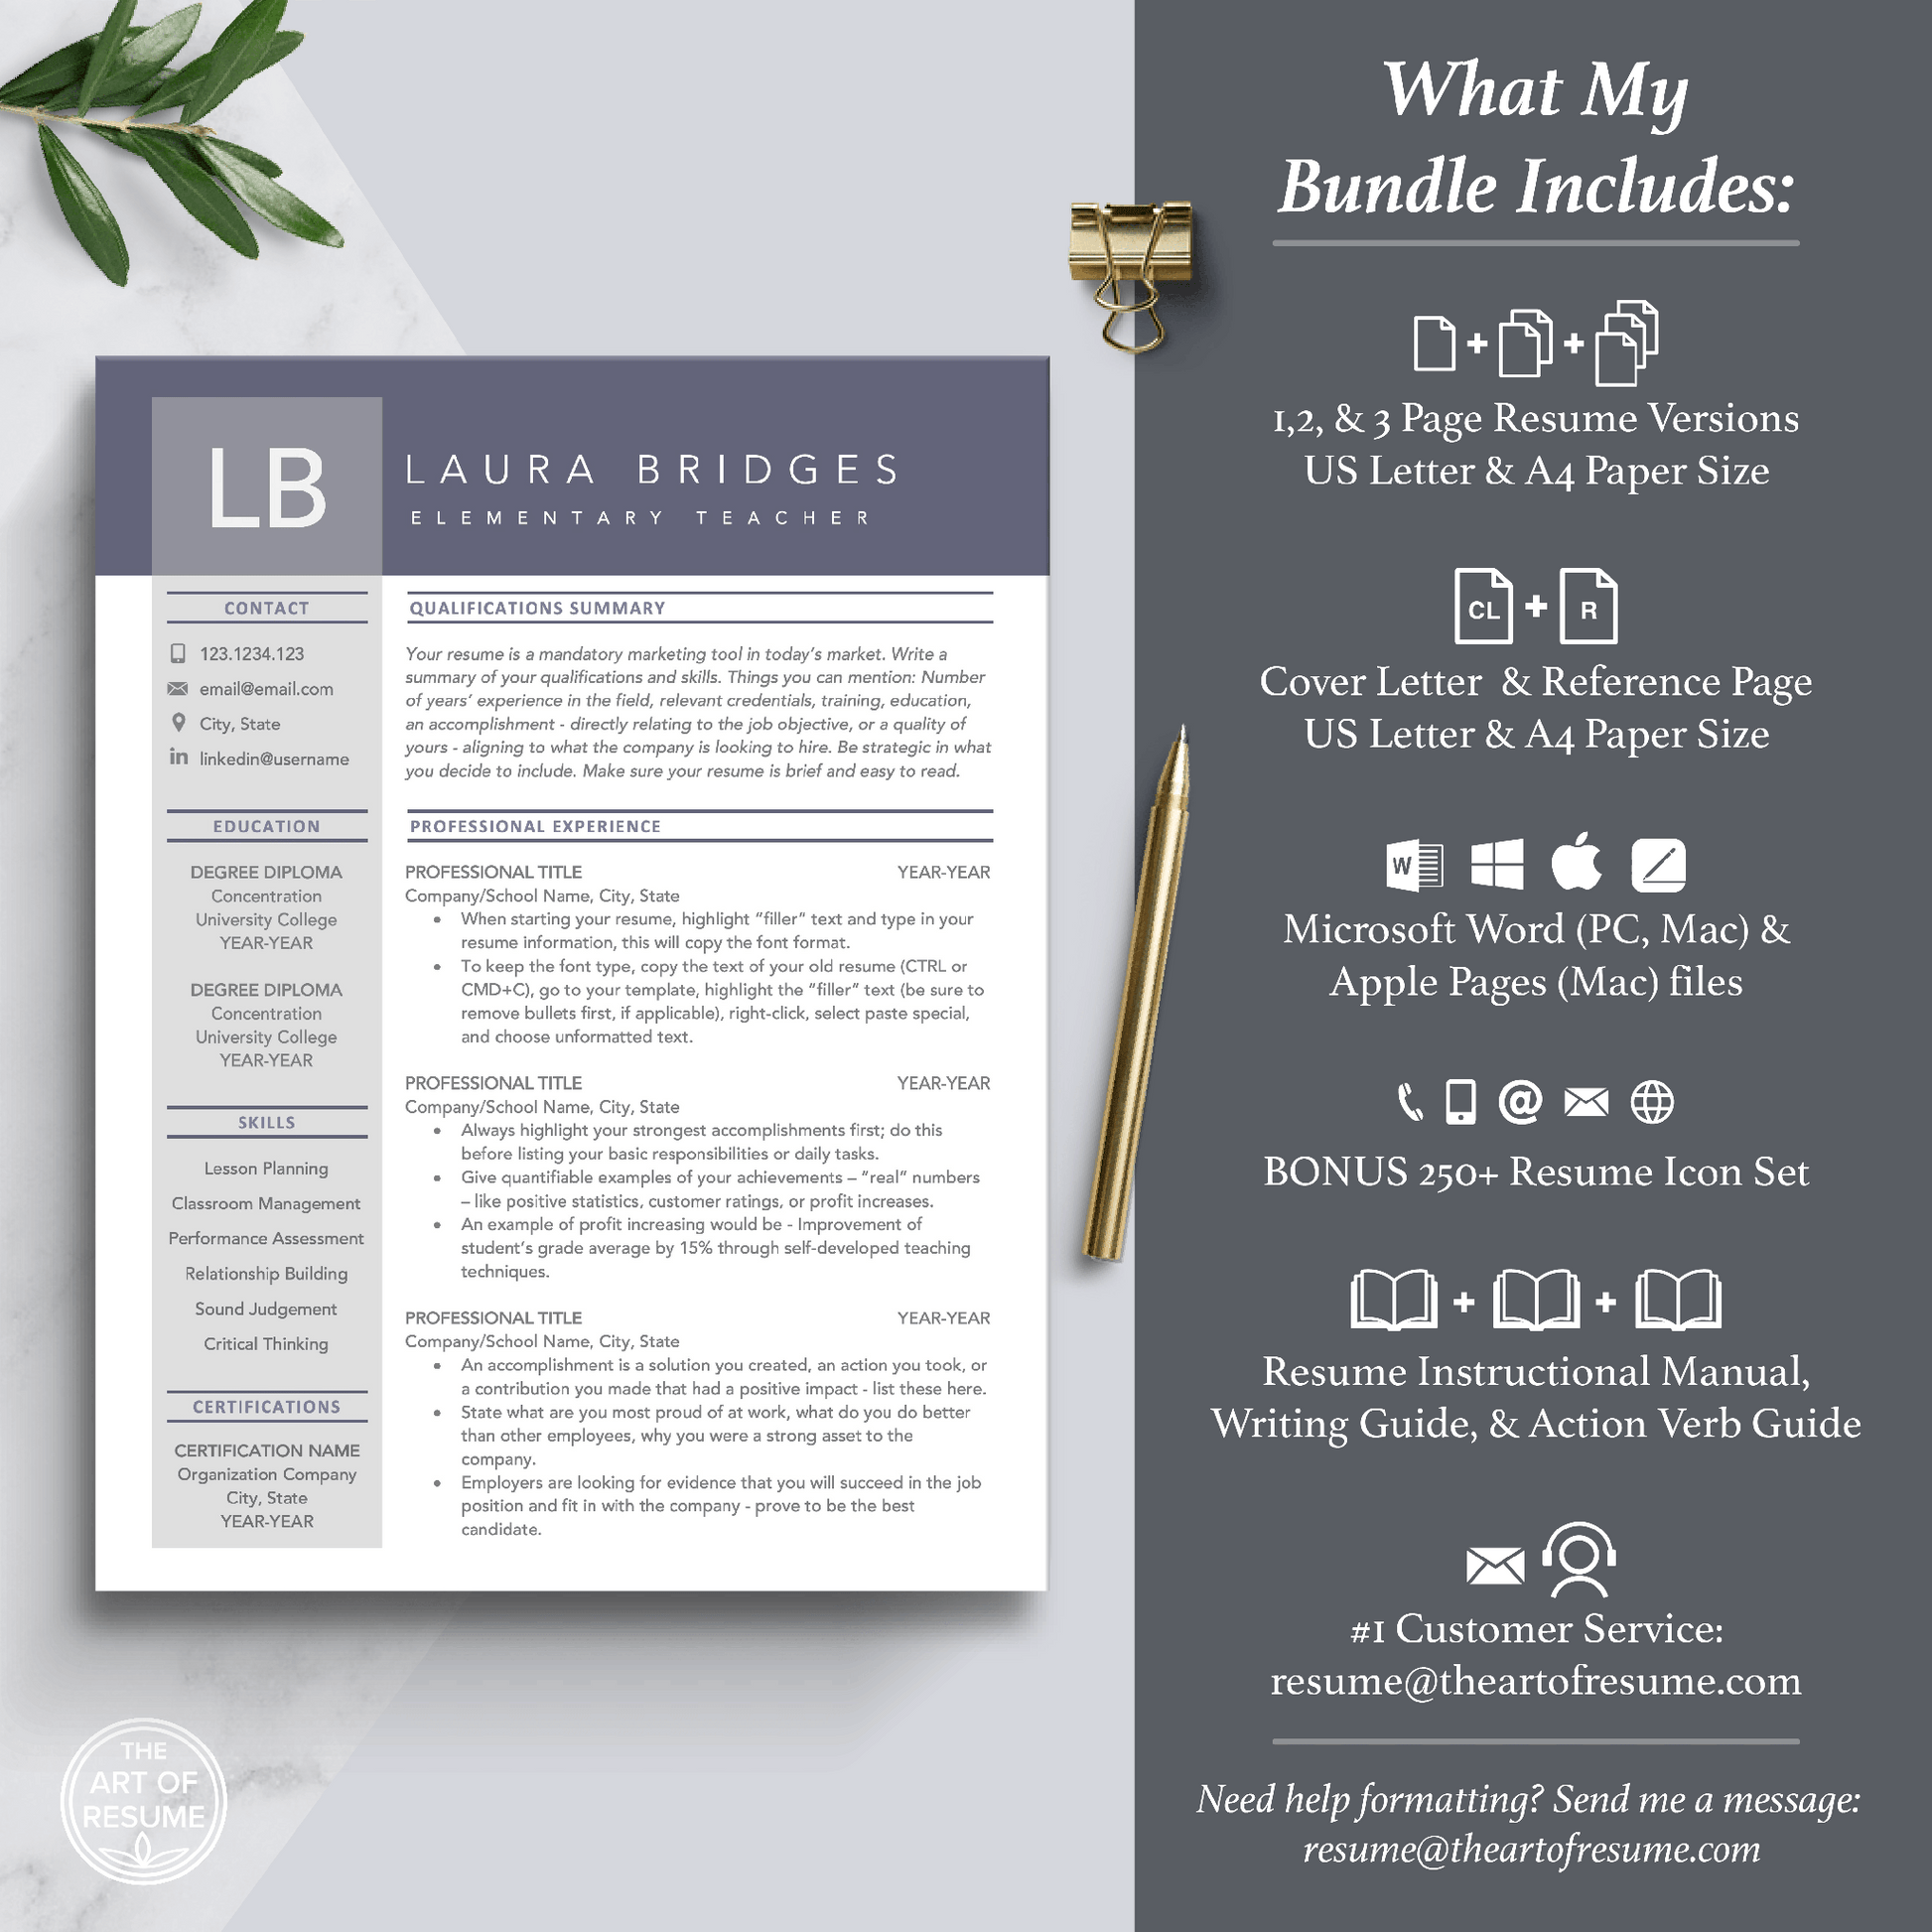 The Art of Resume Templates |  Professional Purple CV Template Includes 3 Editable Resume Templates, Cover Letter, Reference Page, Mac, PC, A4 Paper, US size, Free Guide, The Art of Resume Writing, 250 Bonus Resume Icons